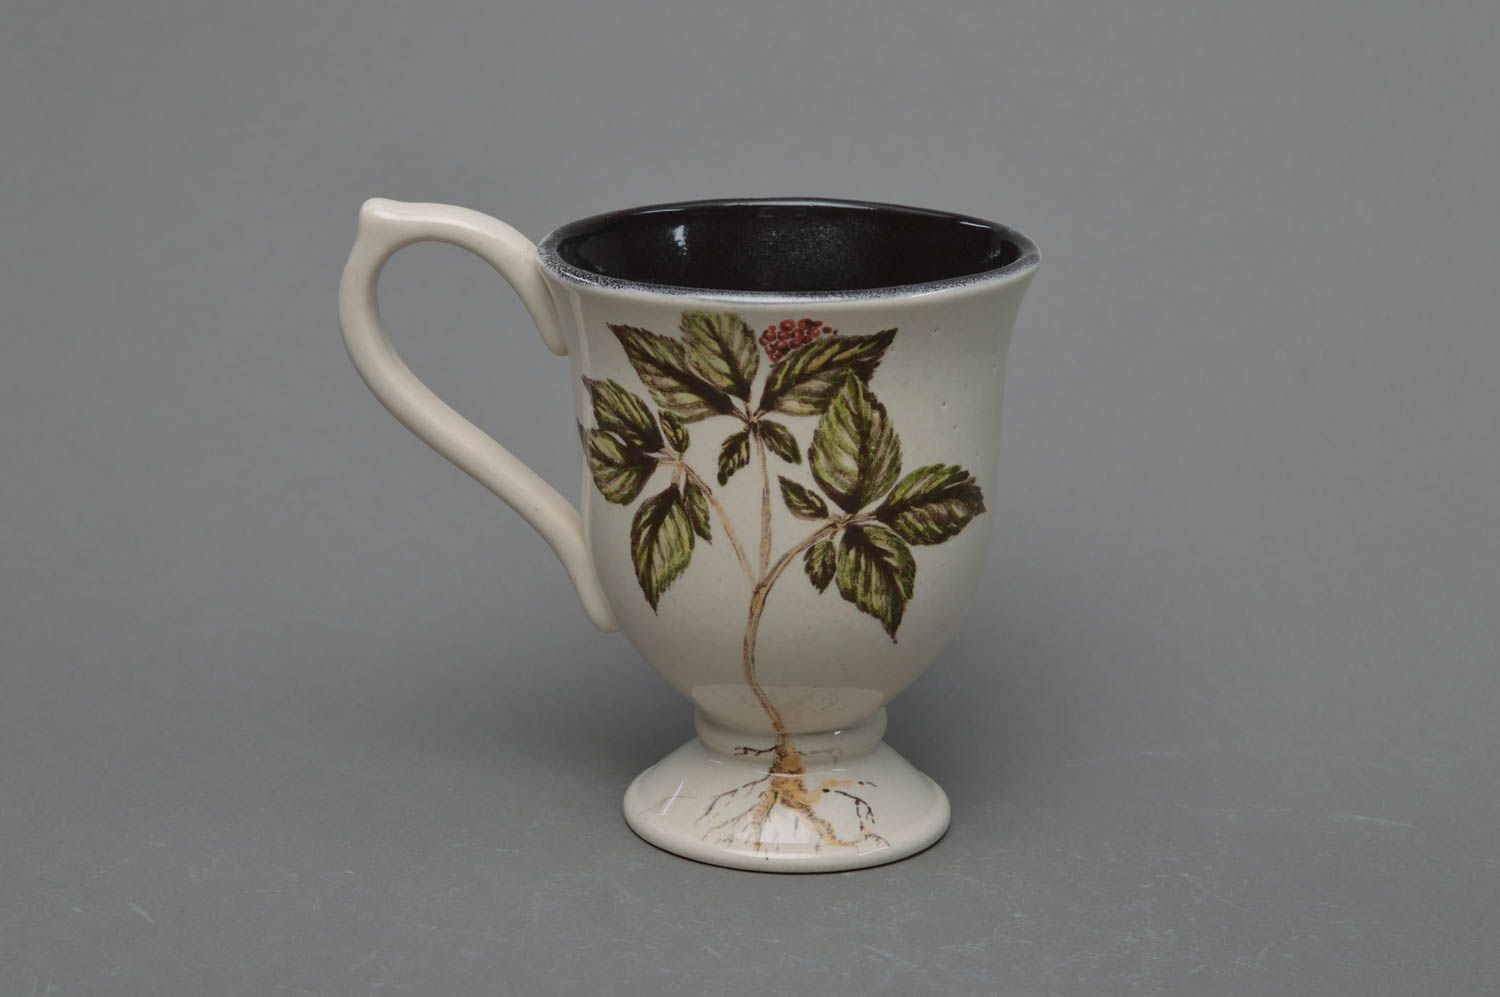 Art 5 oz porcelain teacup with hand-painted pattern and elegant handle photo 1